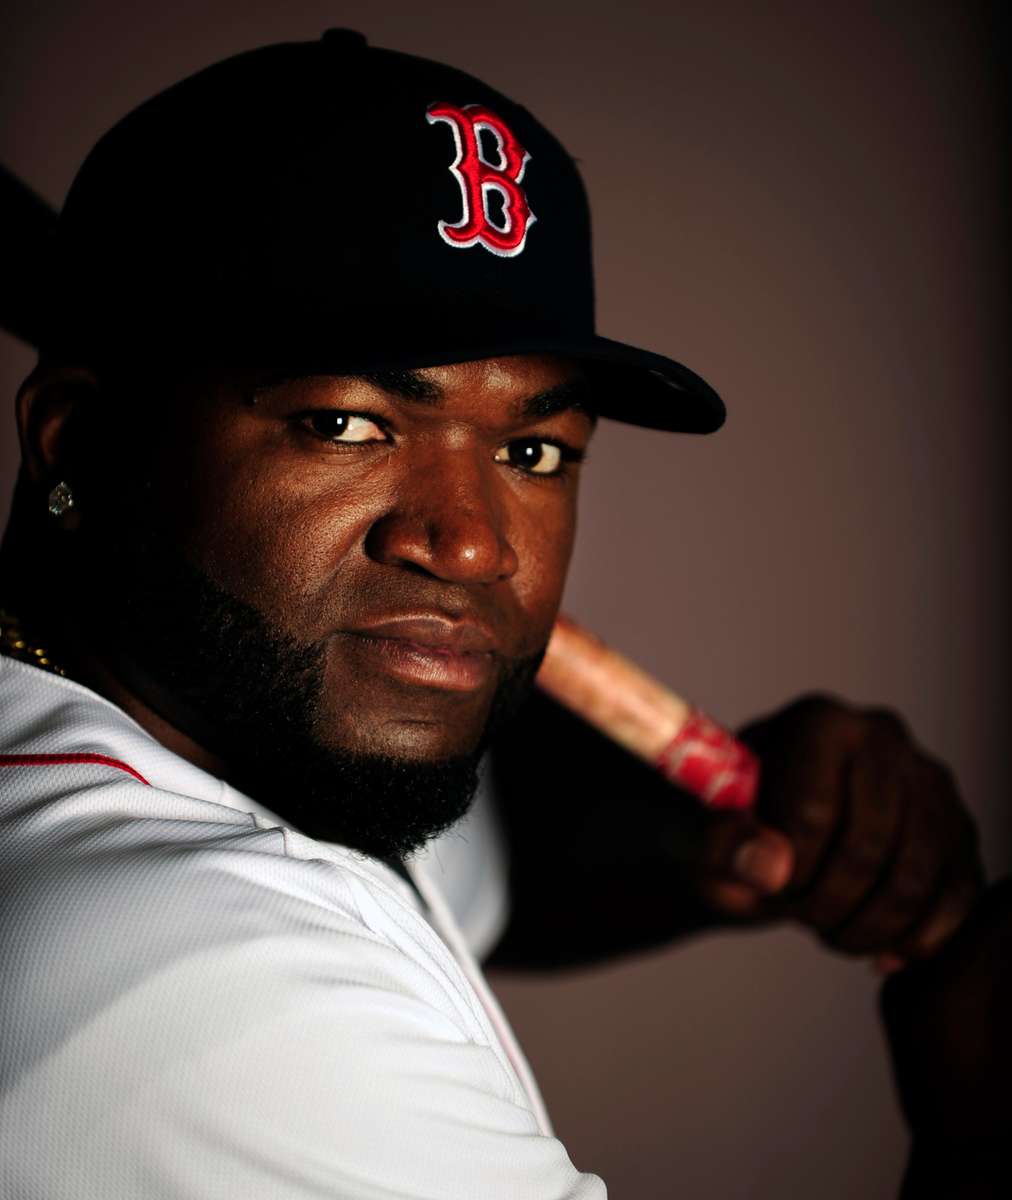 Boston Red Sox designated hitter David Ortiz poses during photo day on Sunday, February 23, 2014 at JetBlue Park in Ft. Myers, Fla.